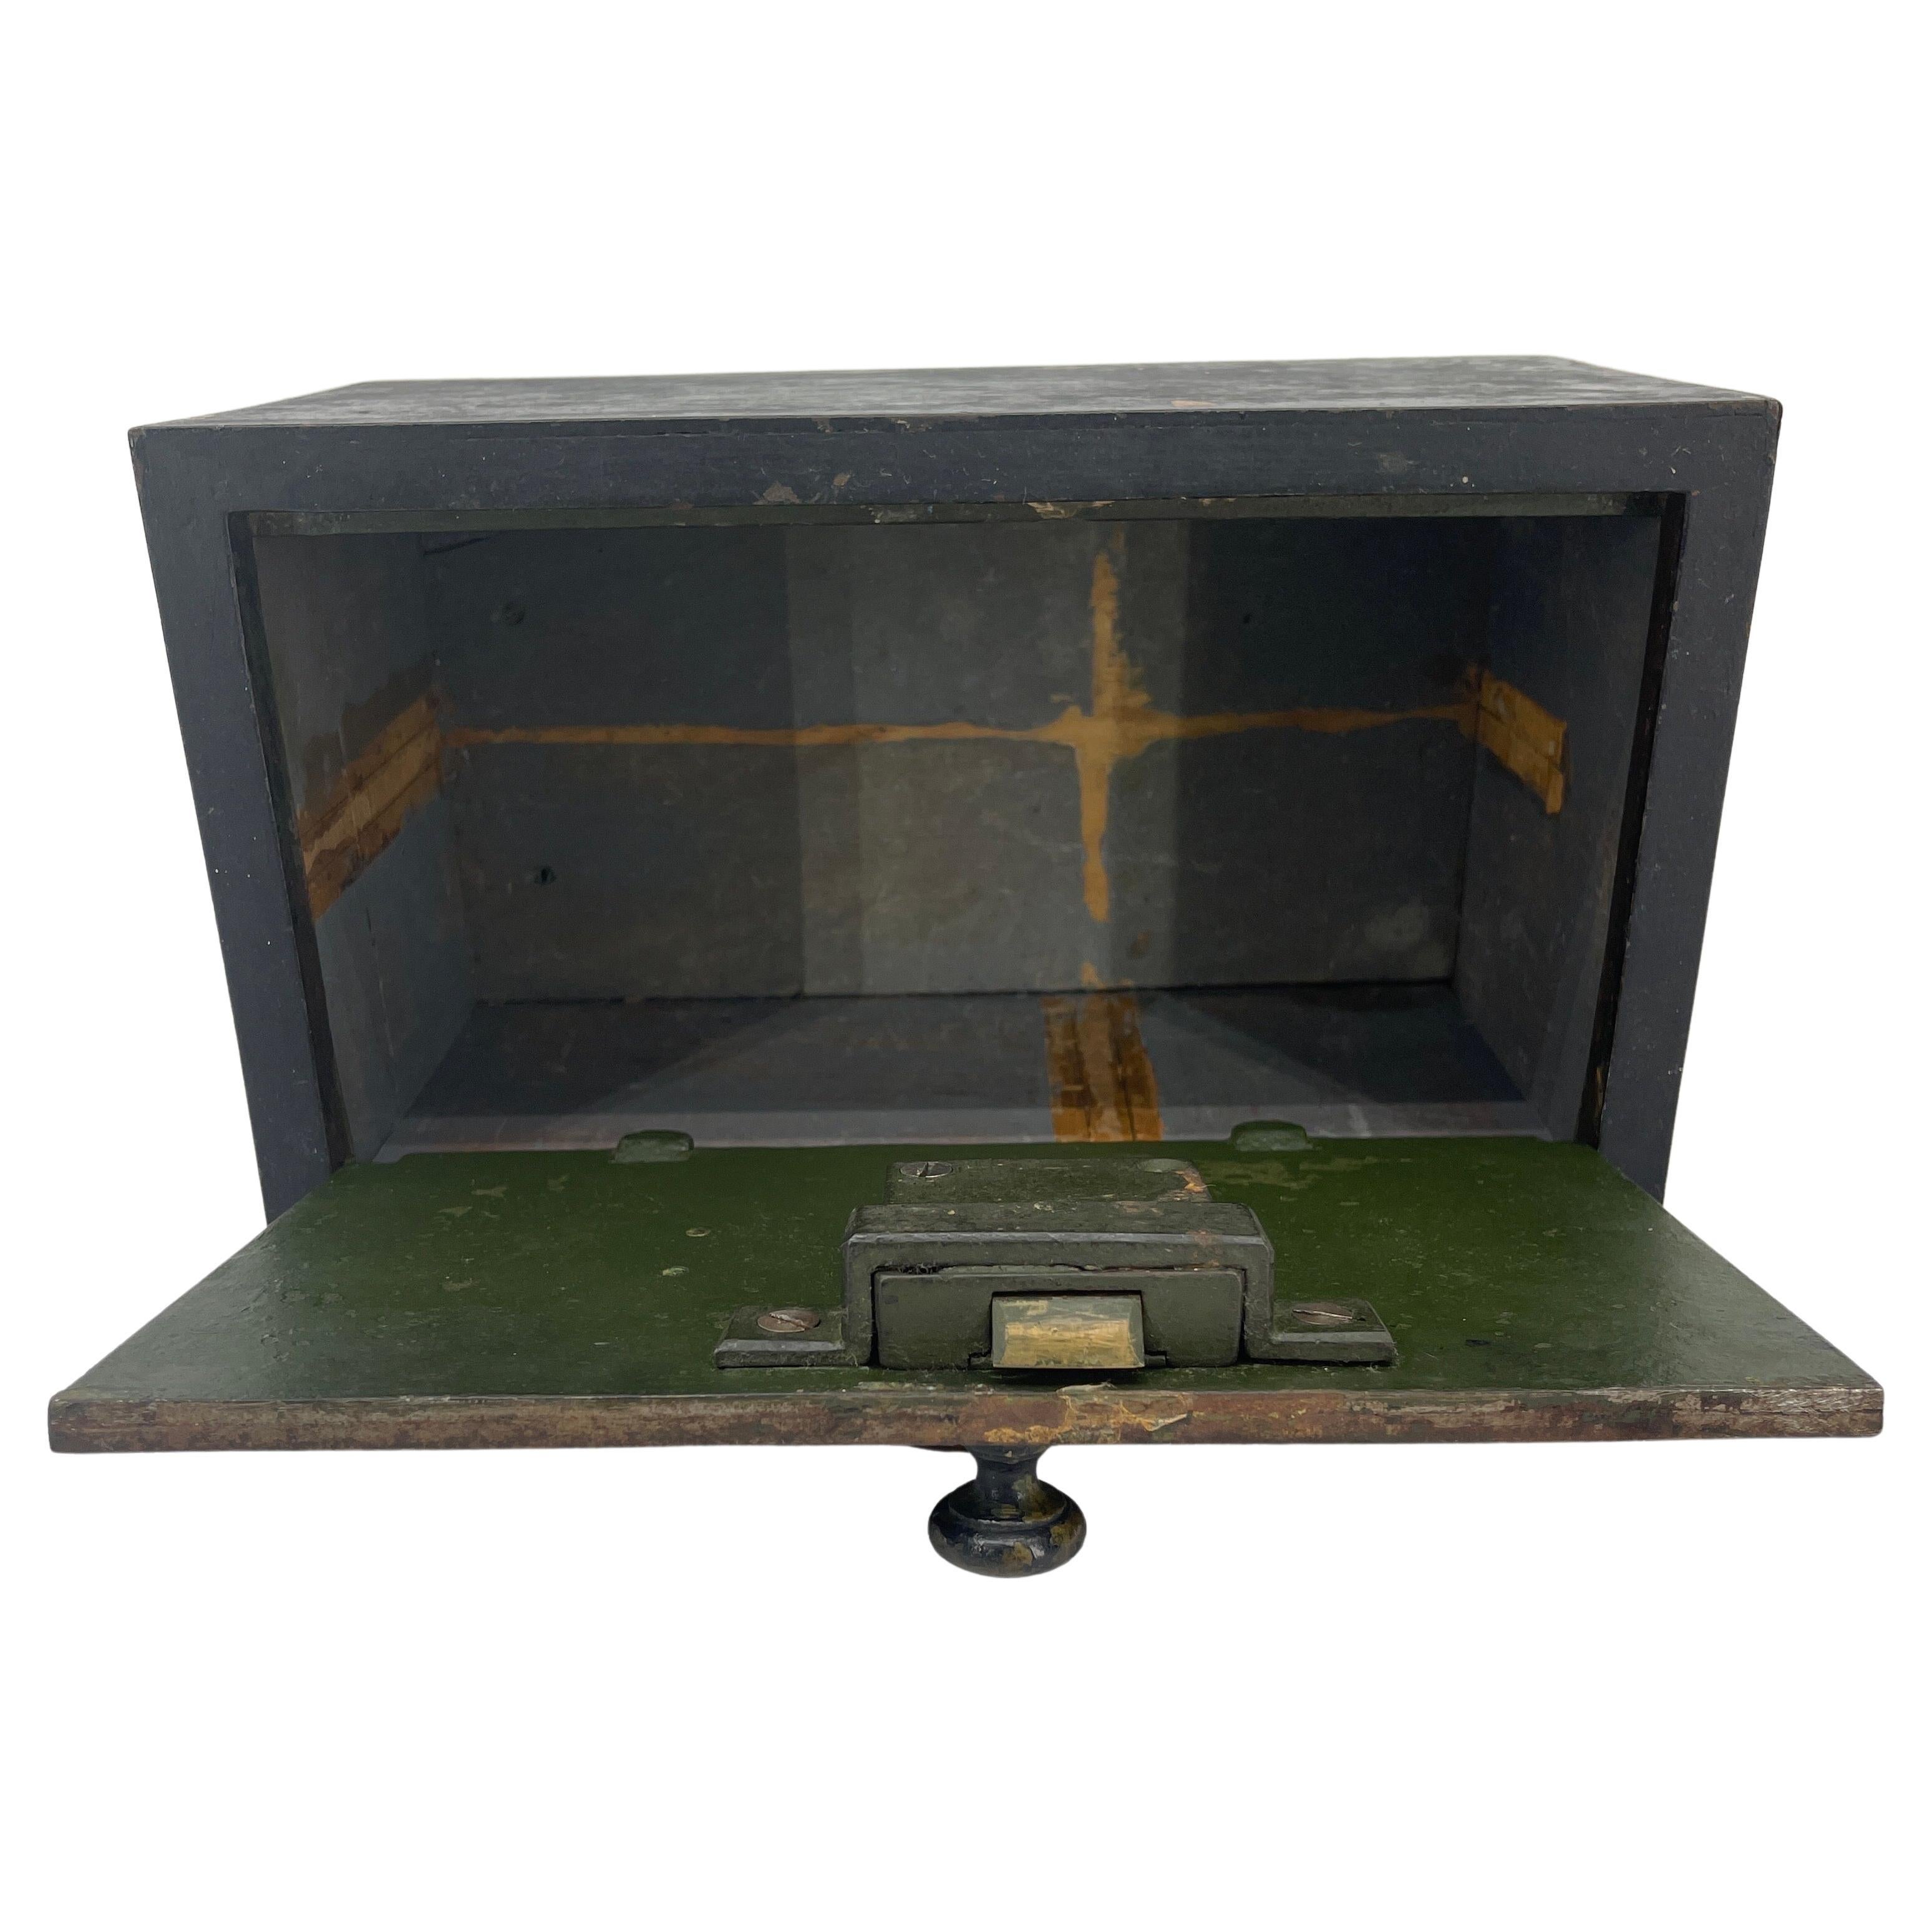 Early 1900 Hundreds lock box safe. The safe is in black painted steel with brass hardware and key.